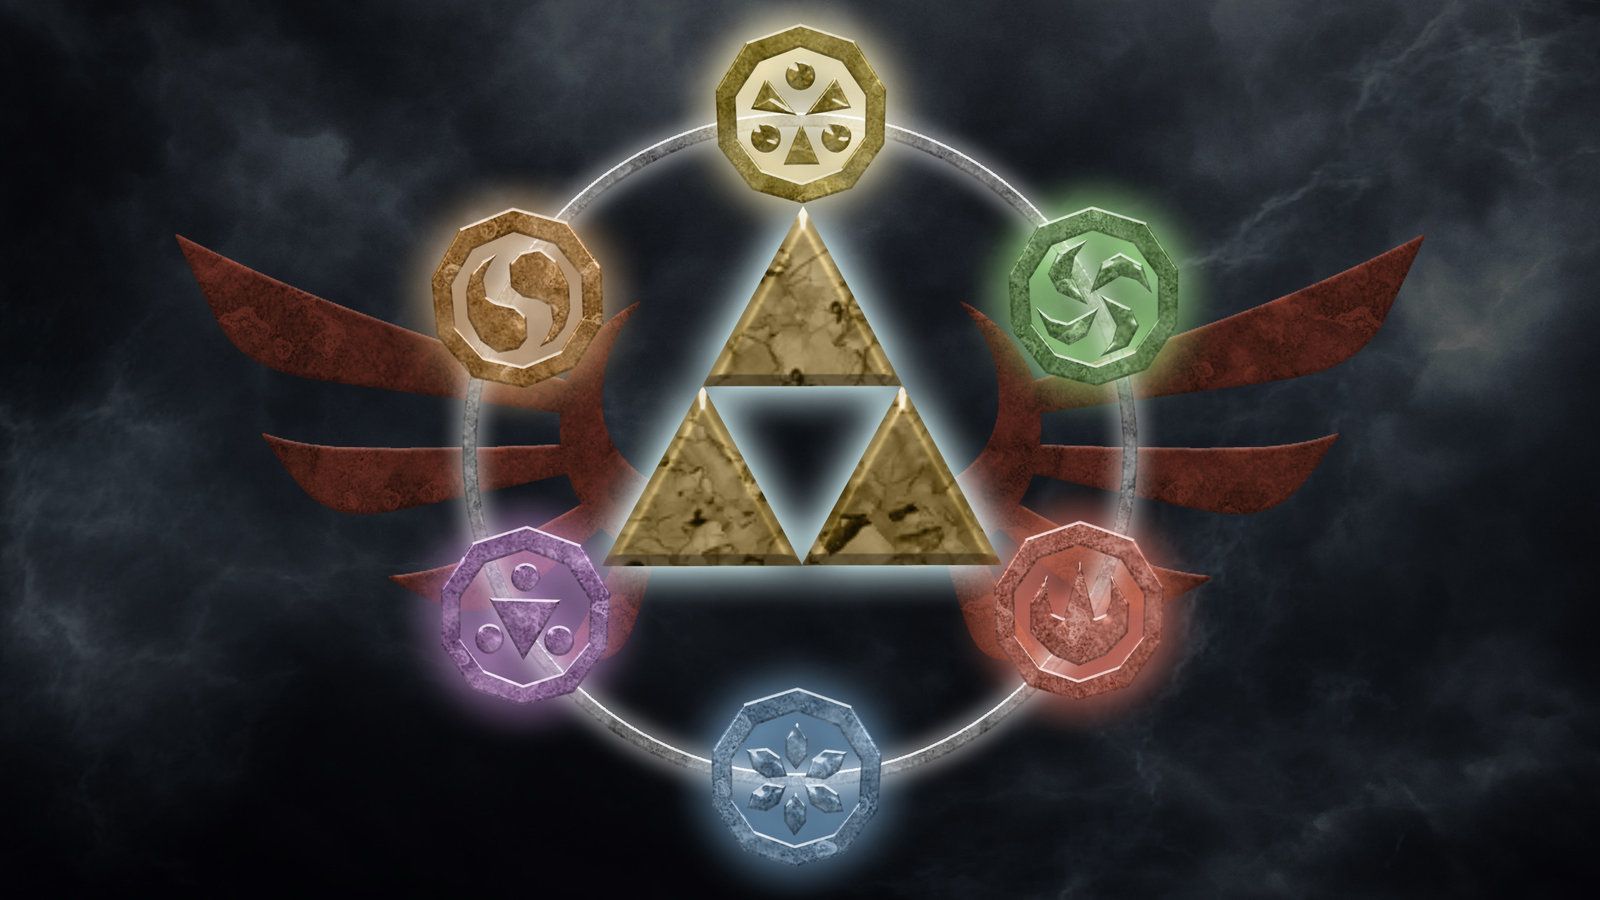 Triforce Wallpapers - Wallpaper Cave